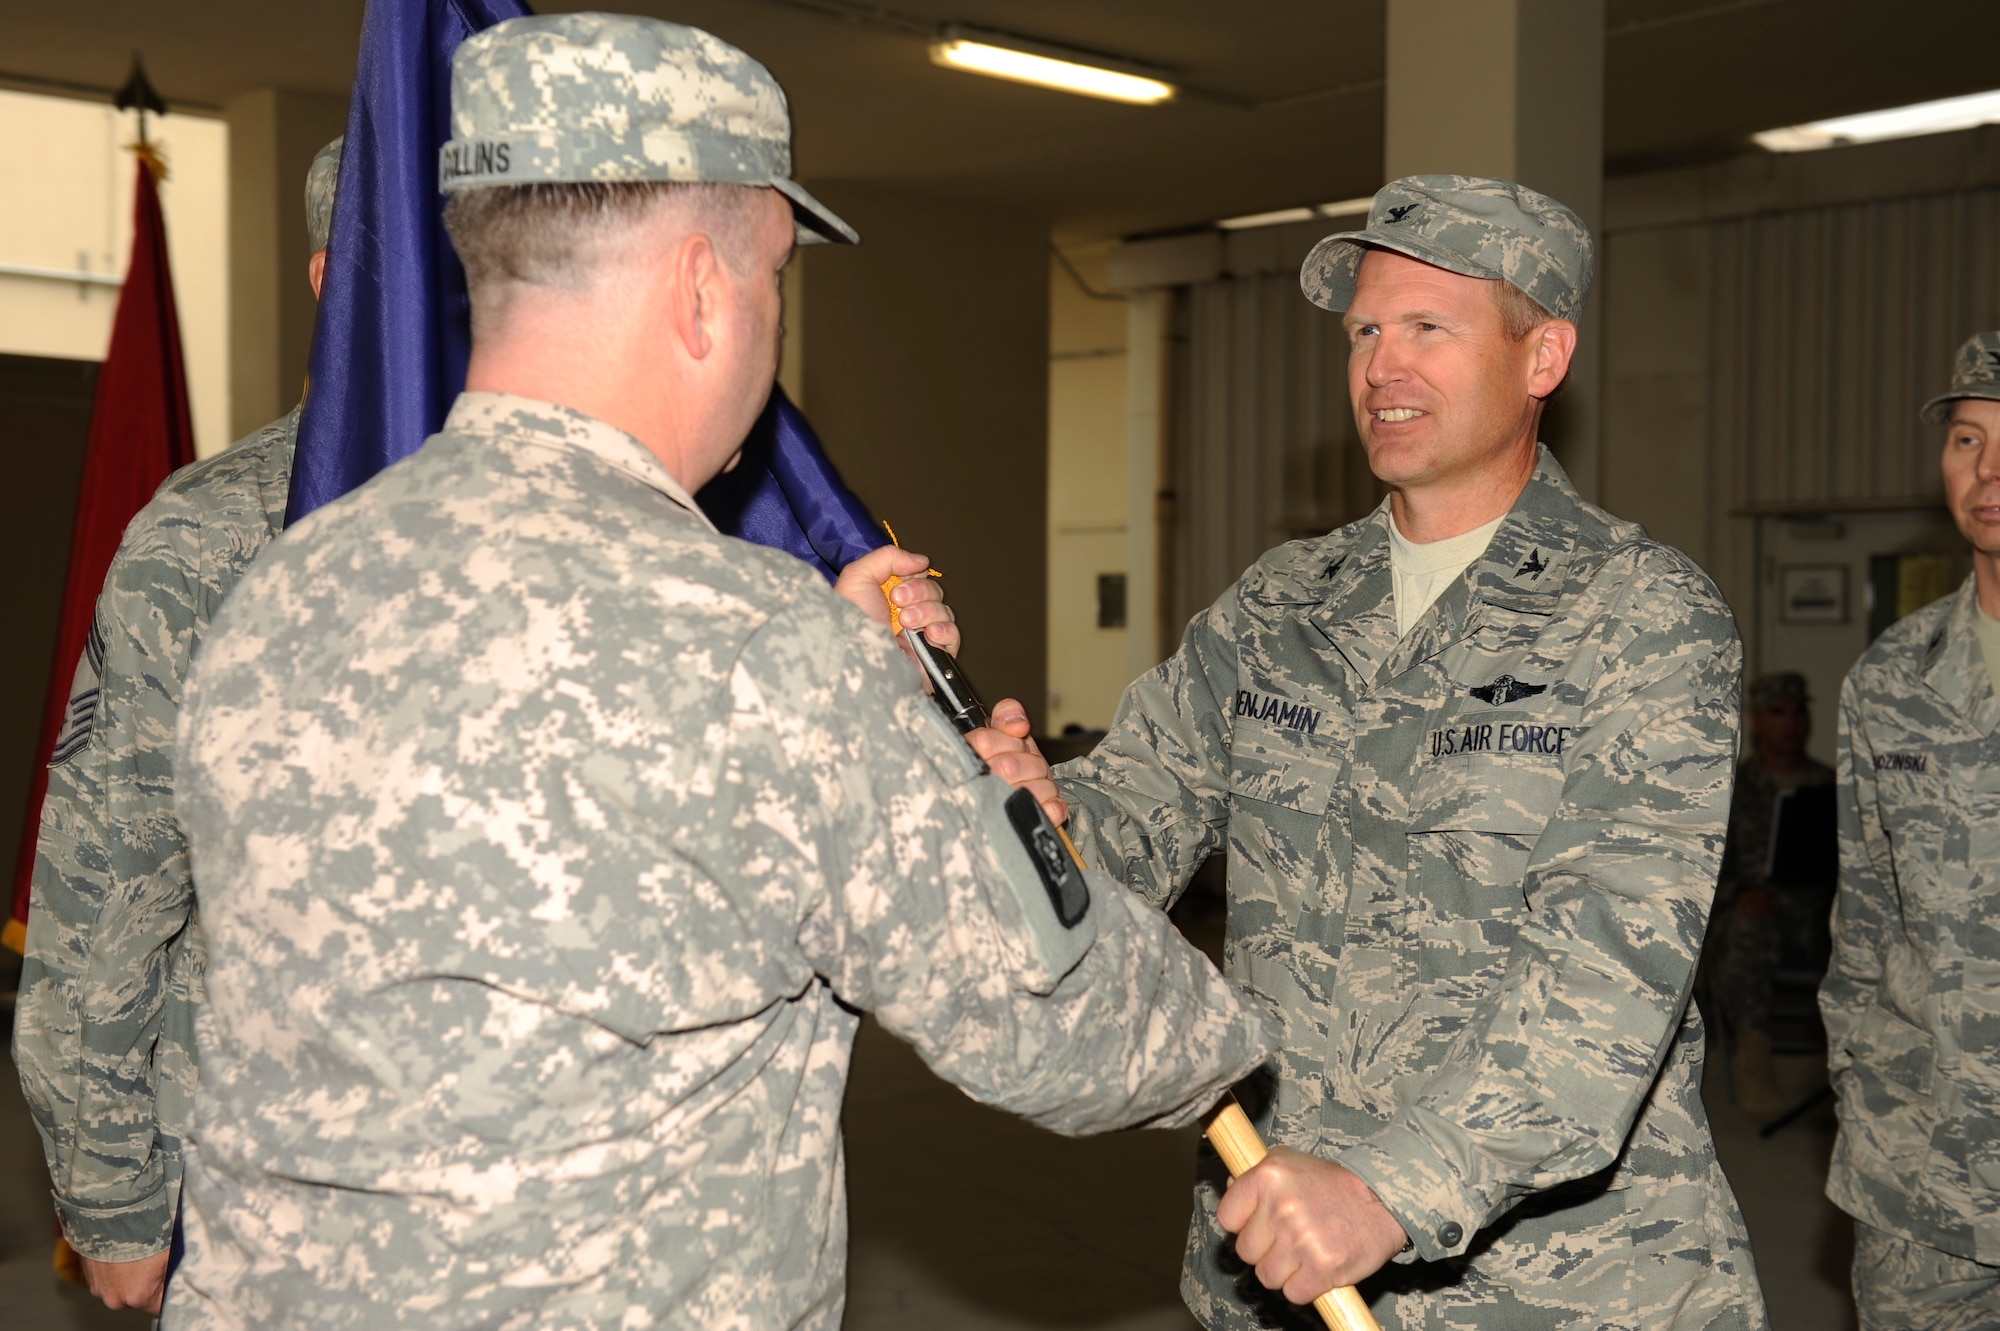 U.S. Army Col. John Collins, commander, Task Force 62nd Medical Brigade, gives the guidon to U.S. Air Force Col. (Dr.) Christian Benjamin, 455th Expeditionary Medical Group/ Task Force Medical East, during a change of command ceremony at Bagram Airfield, Afghanistan, May 4, 2010. (U.S. Air Force photo by/ Master Sgt. Jeromy K. Cross/released)